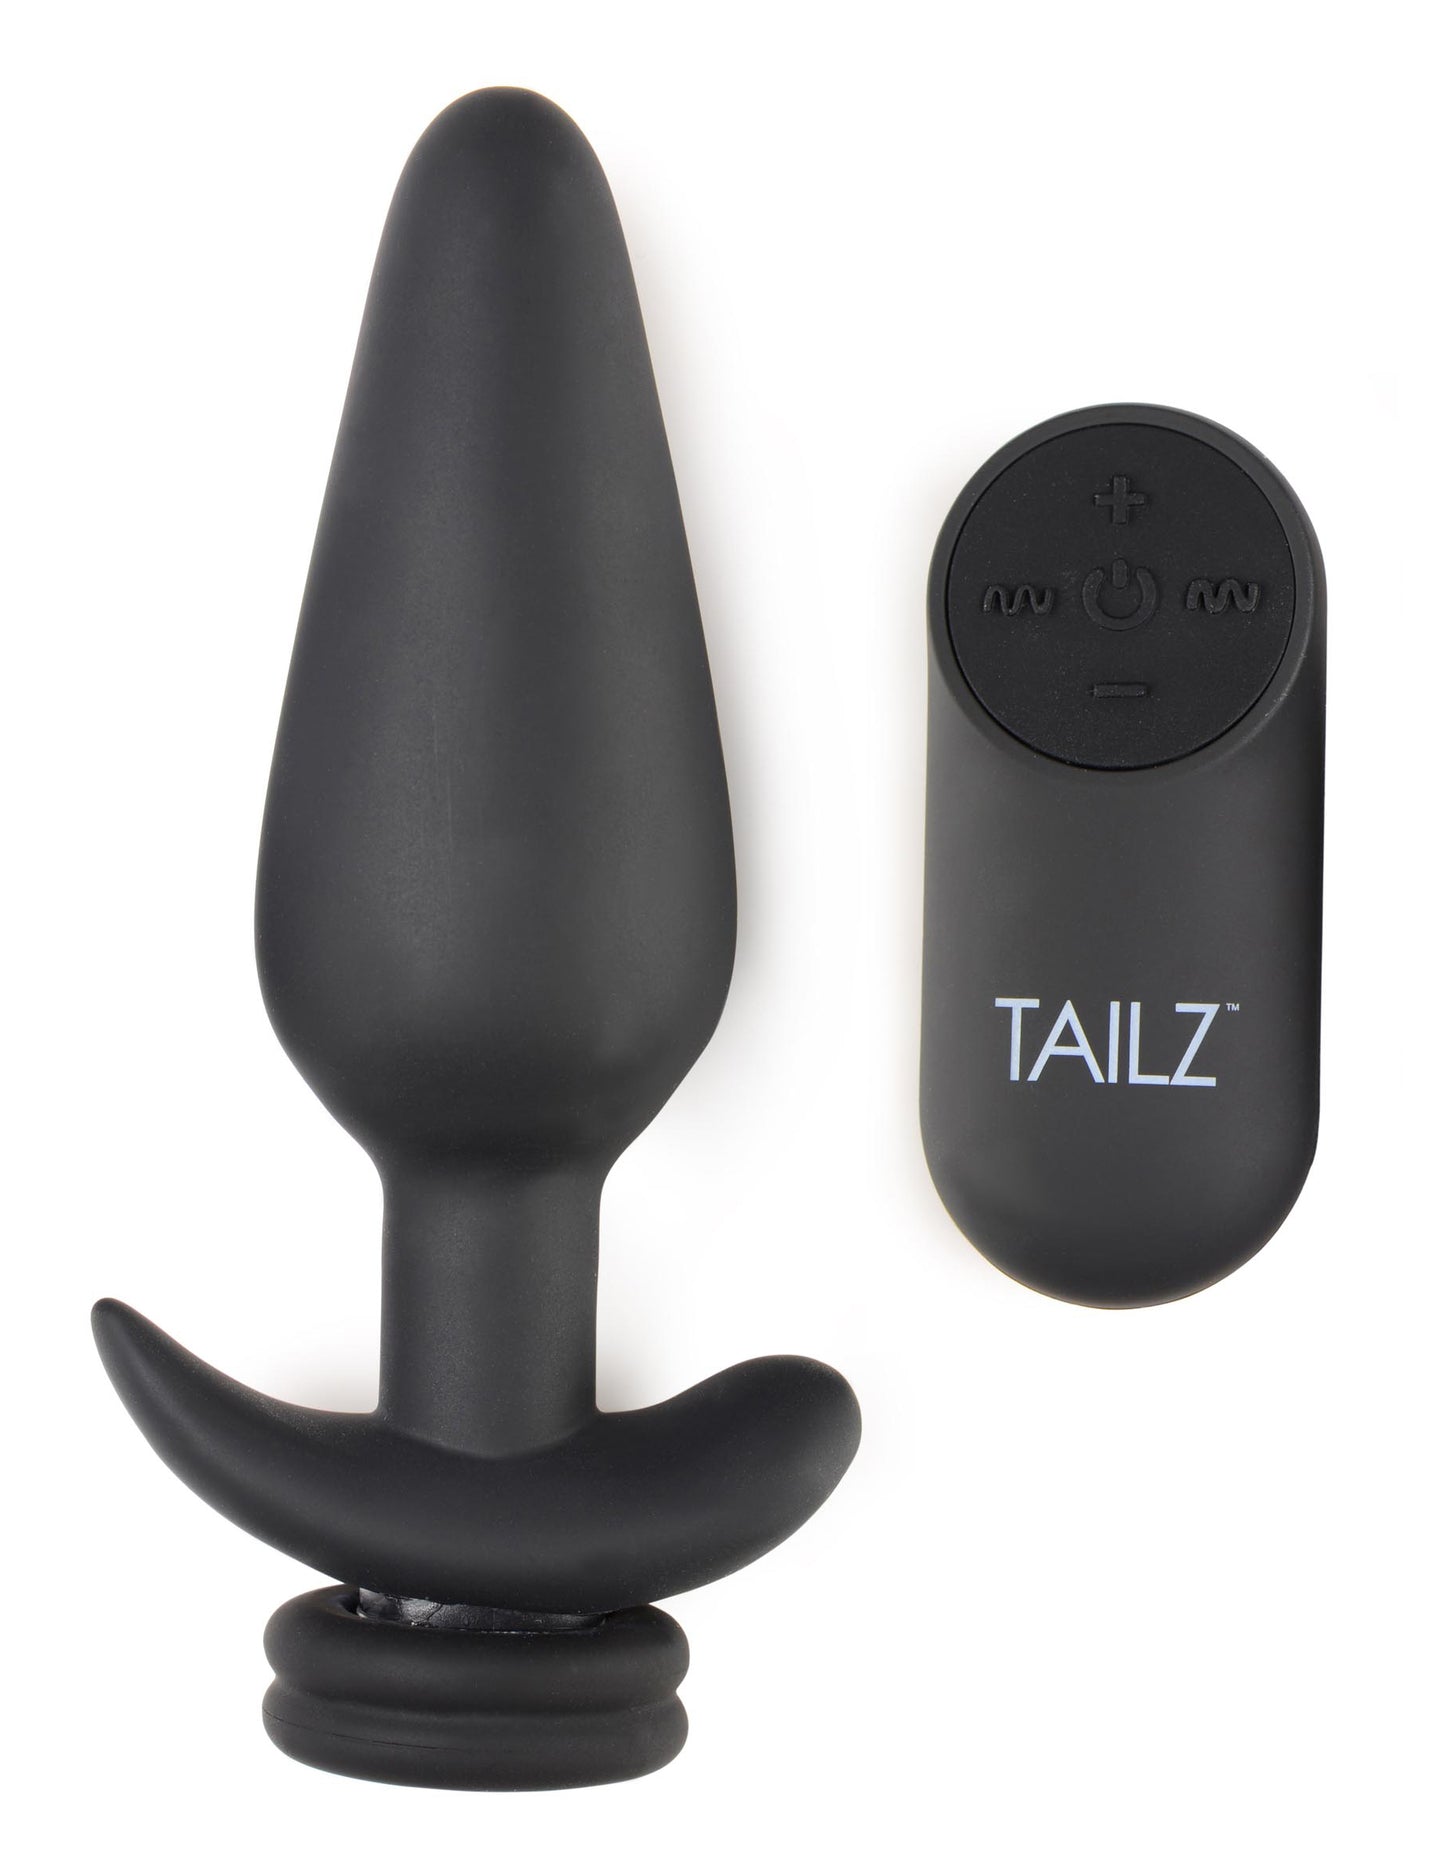 Large Vibrating Anal Plug With Interchangeable Fox Tail - White